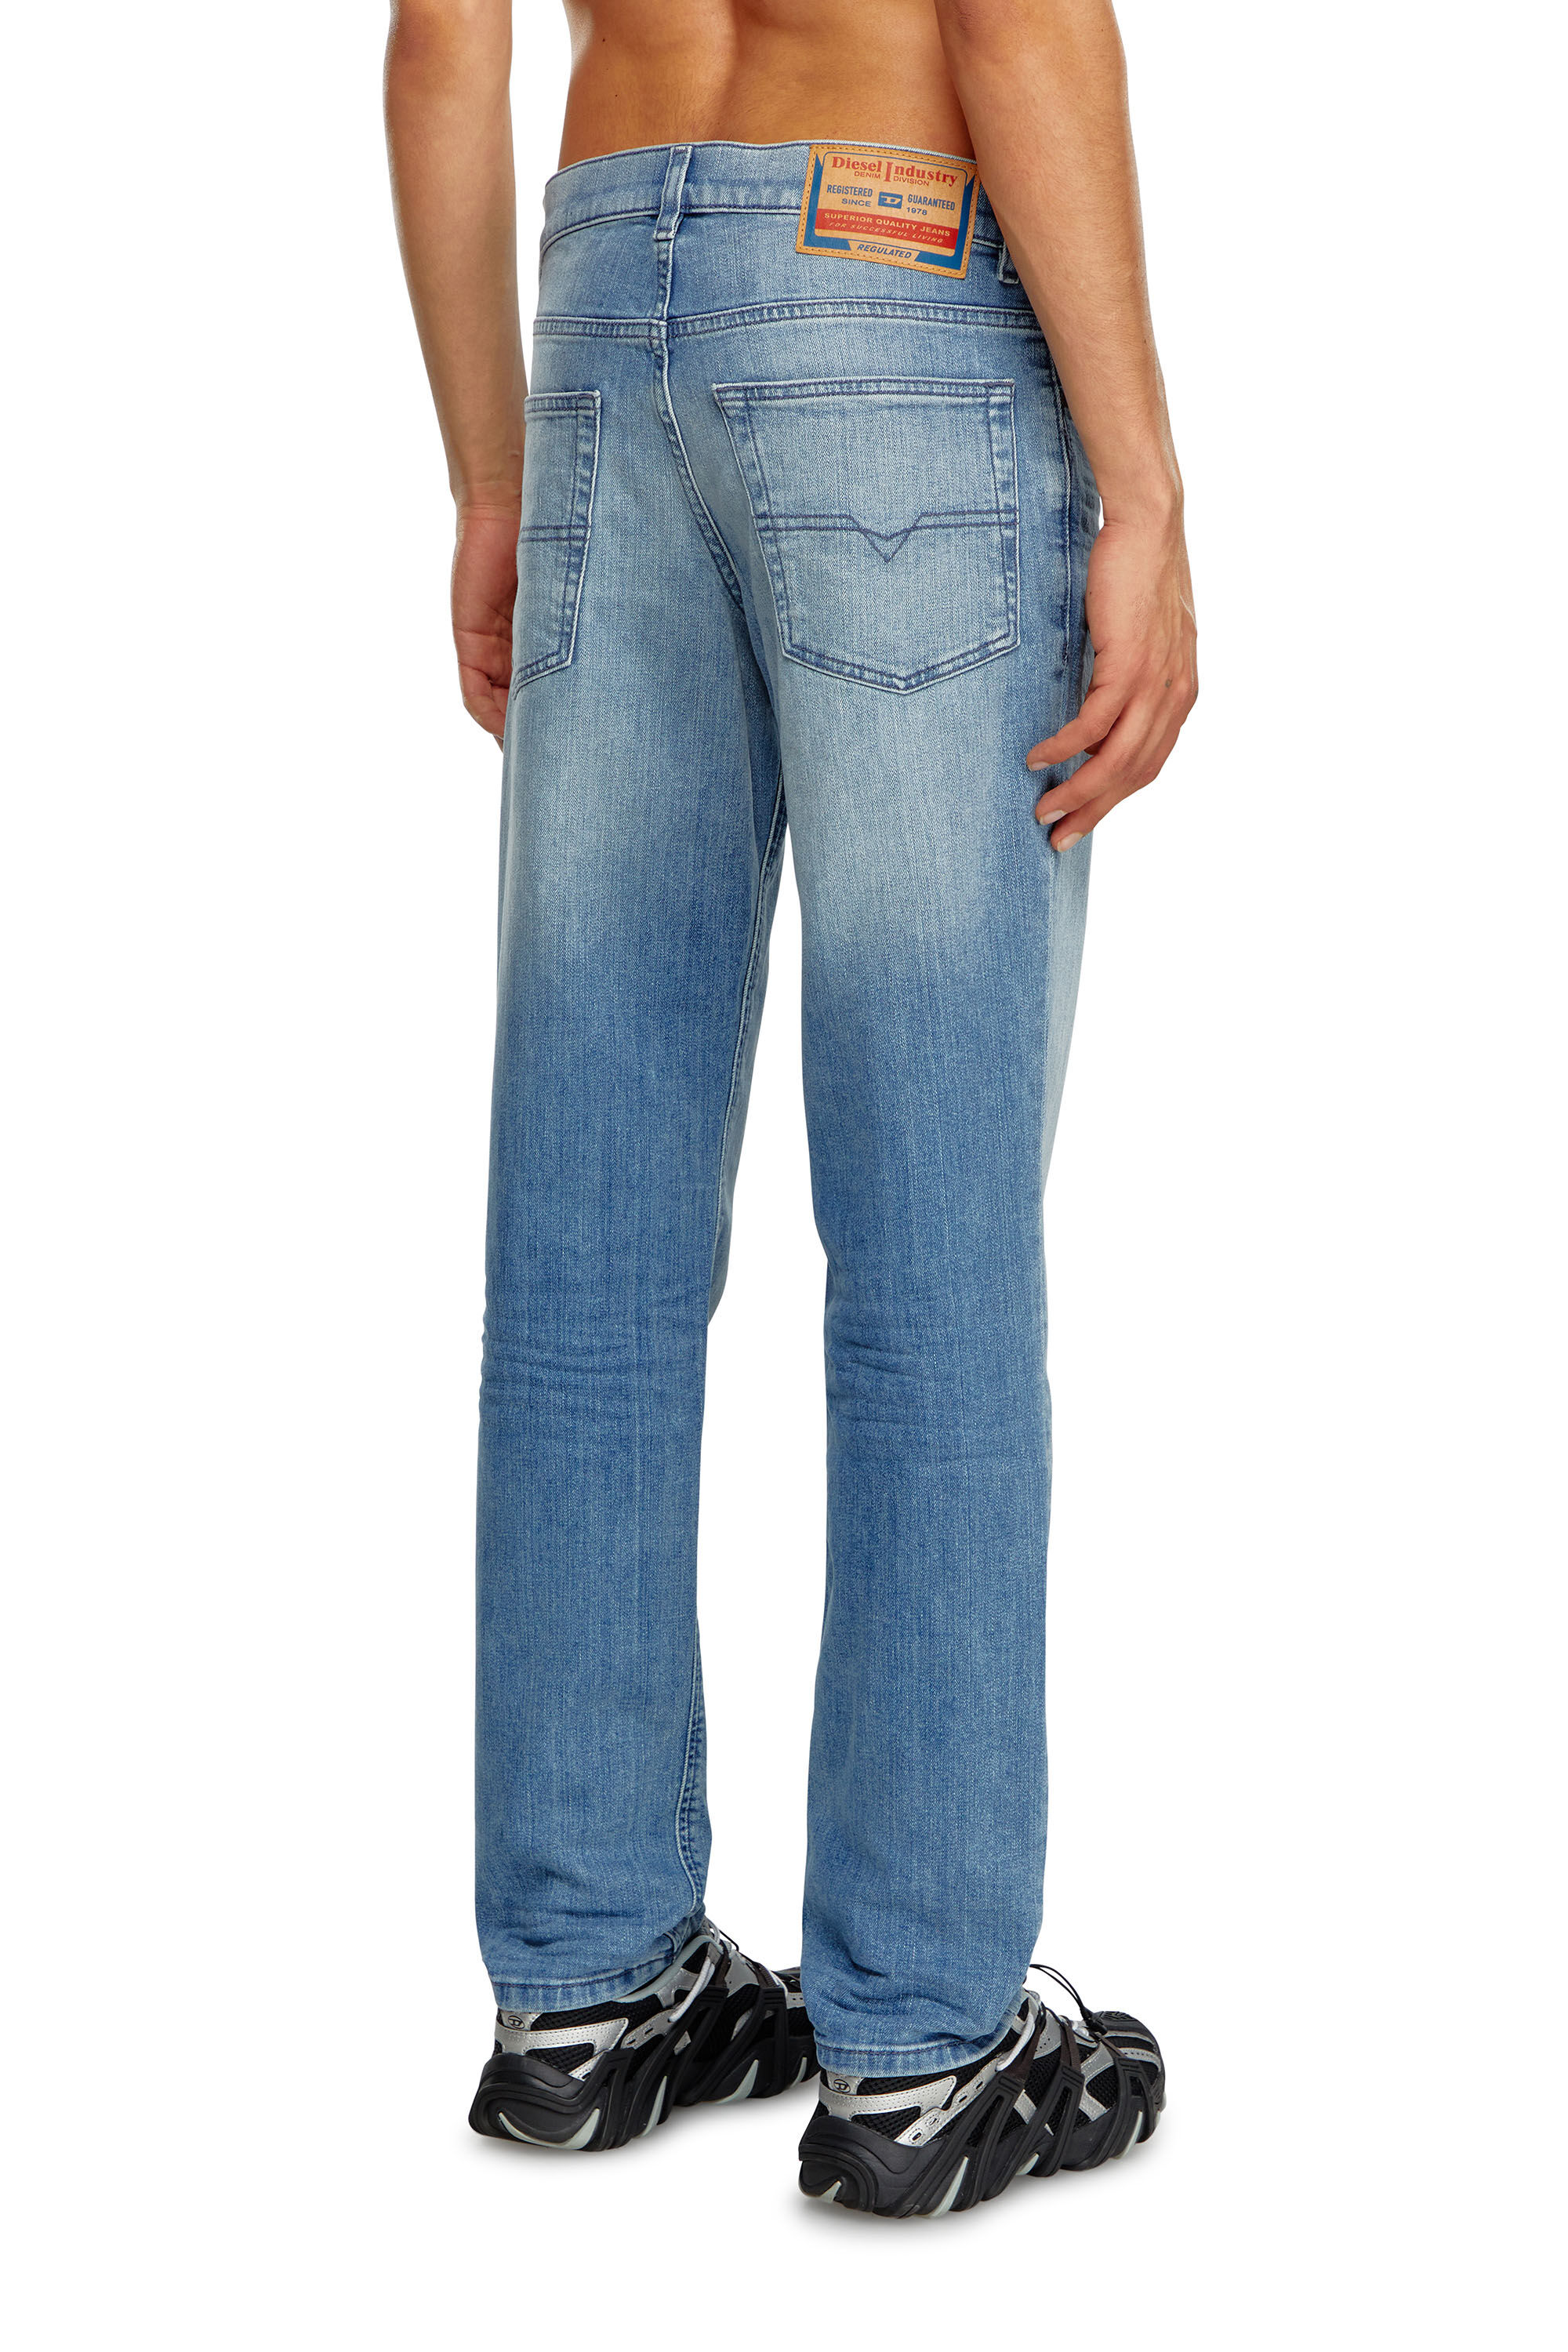 Diesel - Tapered Jeans 2023 D-Finitive 0GRDI, Hombre Tapered Jeans - 2023 D-Finitive in Azul marino - Image 4